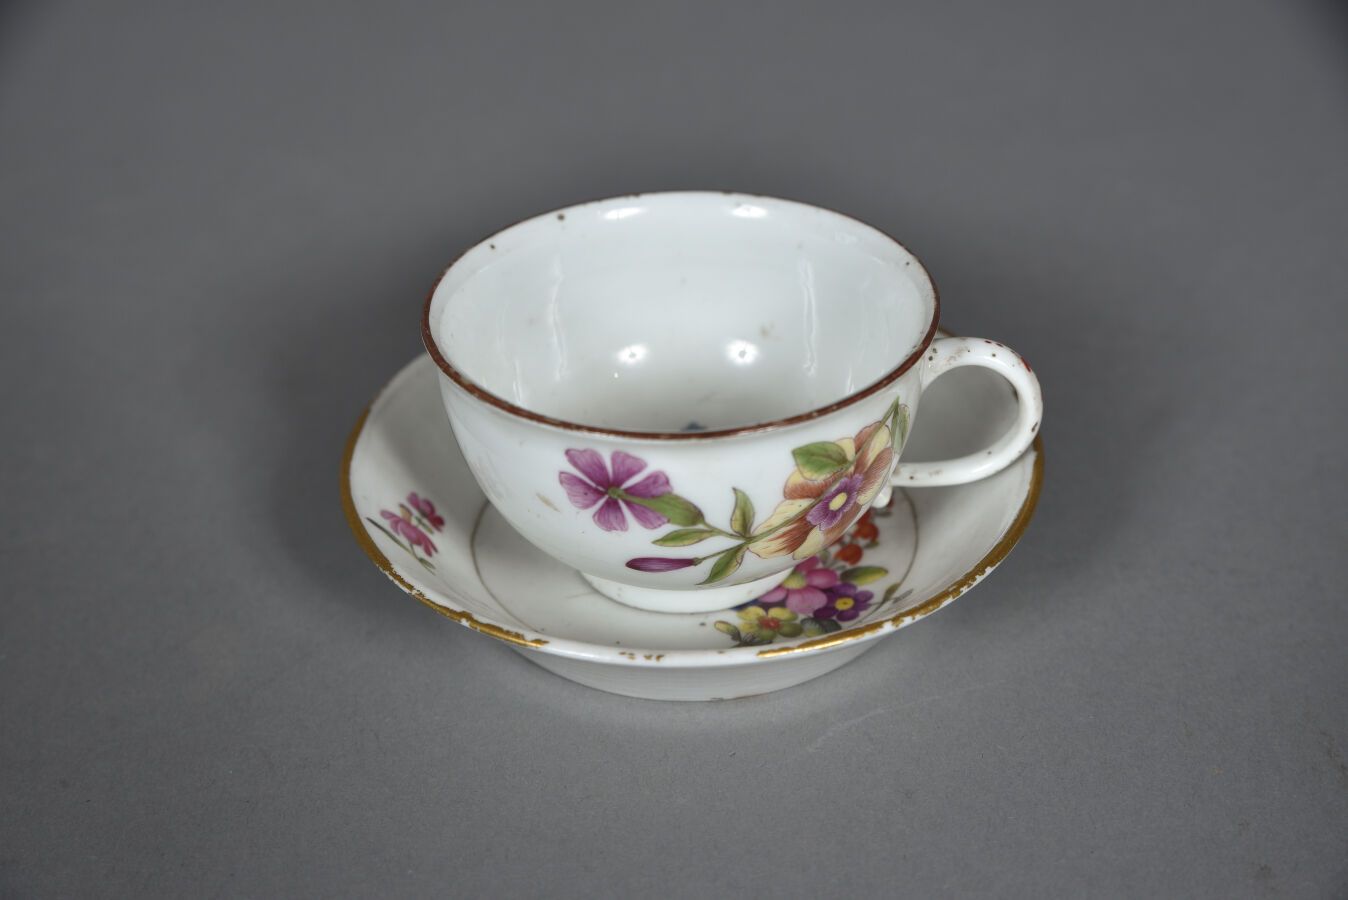 Null MEISSEN.
Porcelain cup with polychrome decoration of flowers in the shaded &hellip;